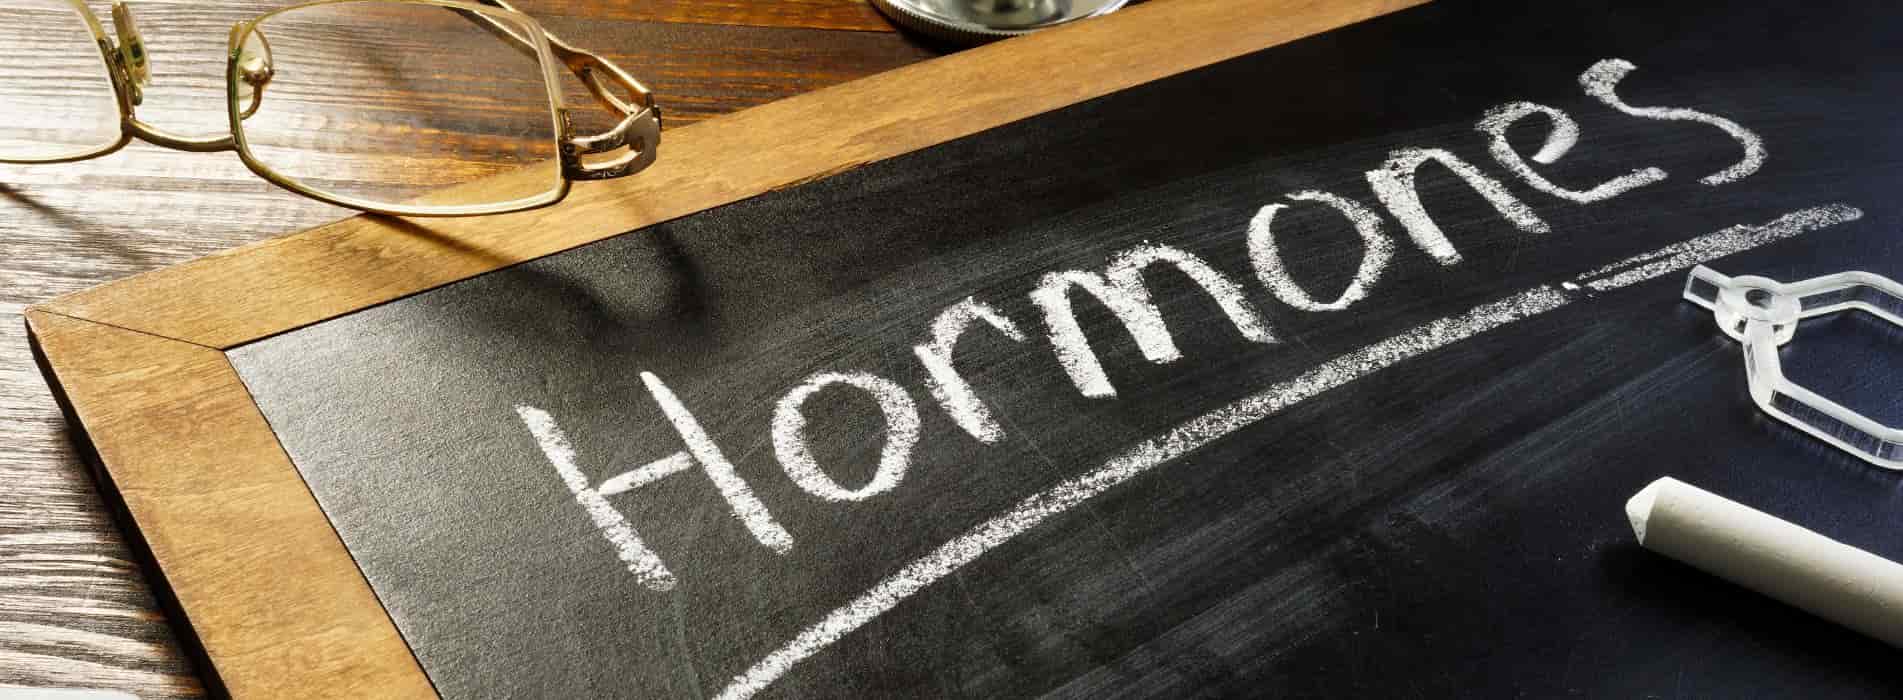 hormones and weight loss